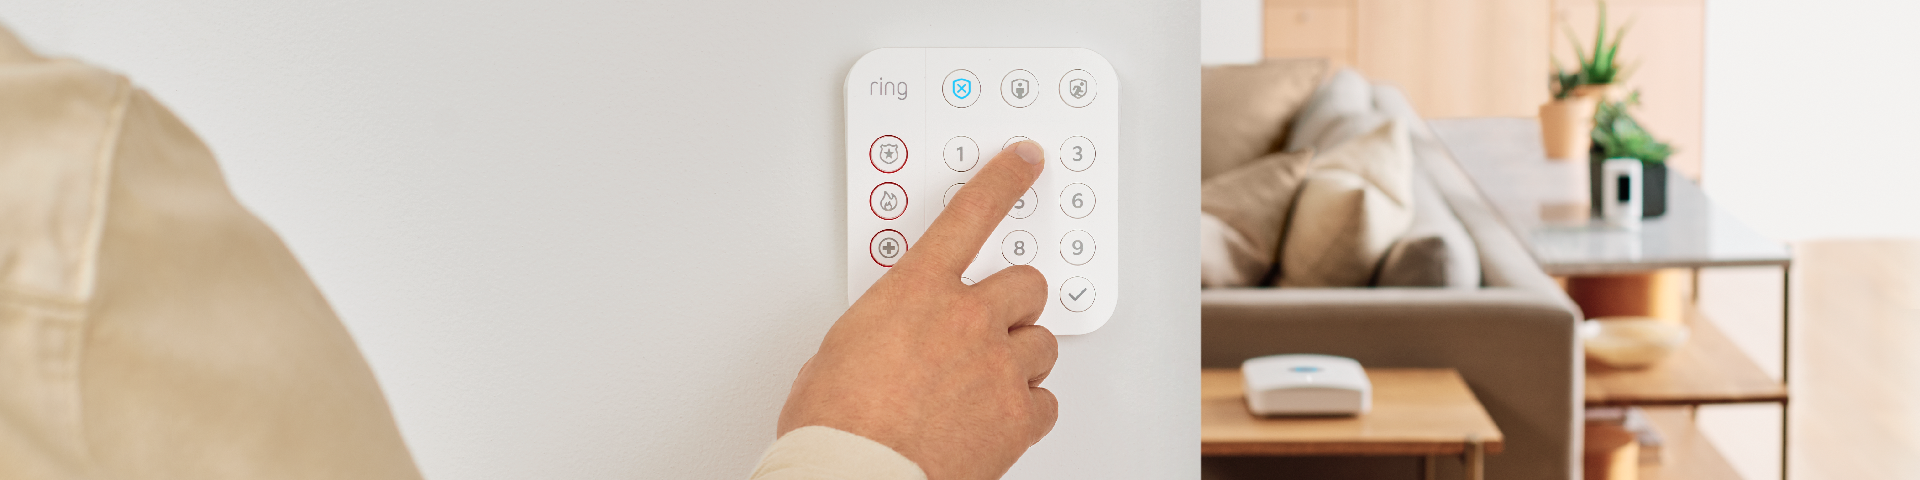 Ring Alarm Subscription Changes - Ring Updates - Ring Community